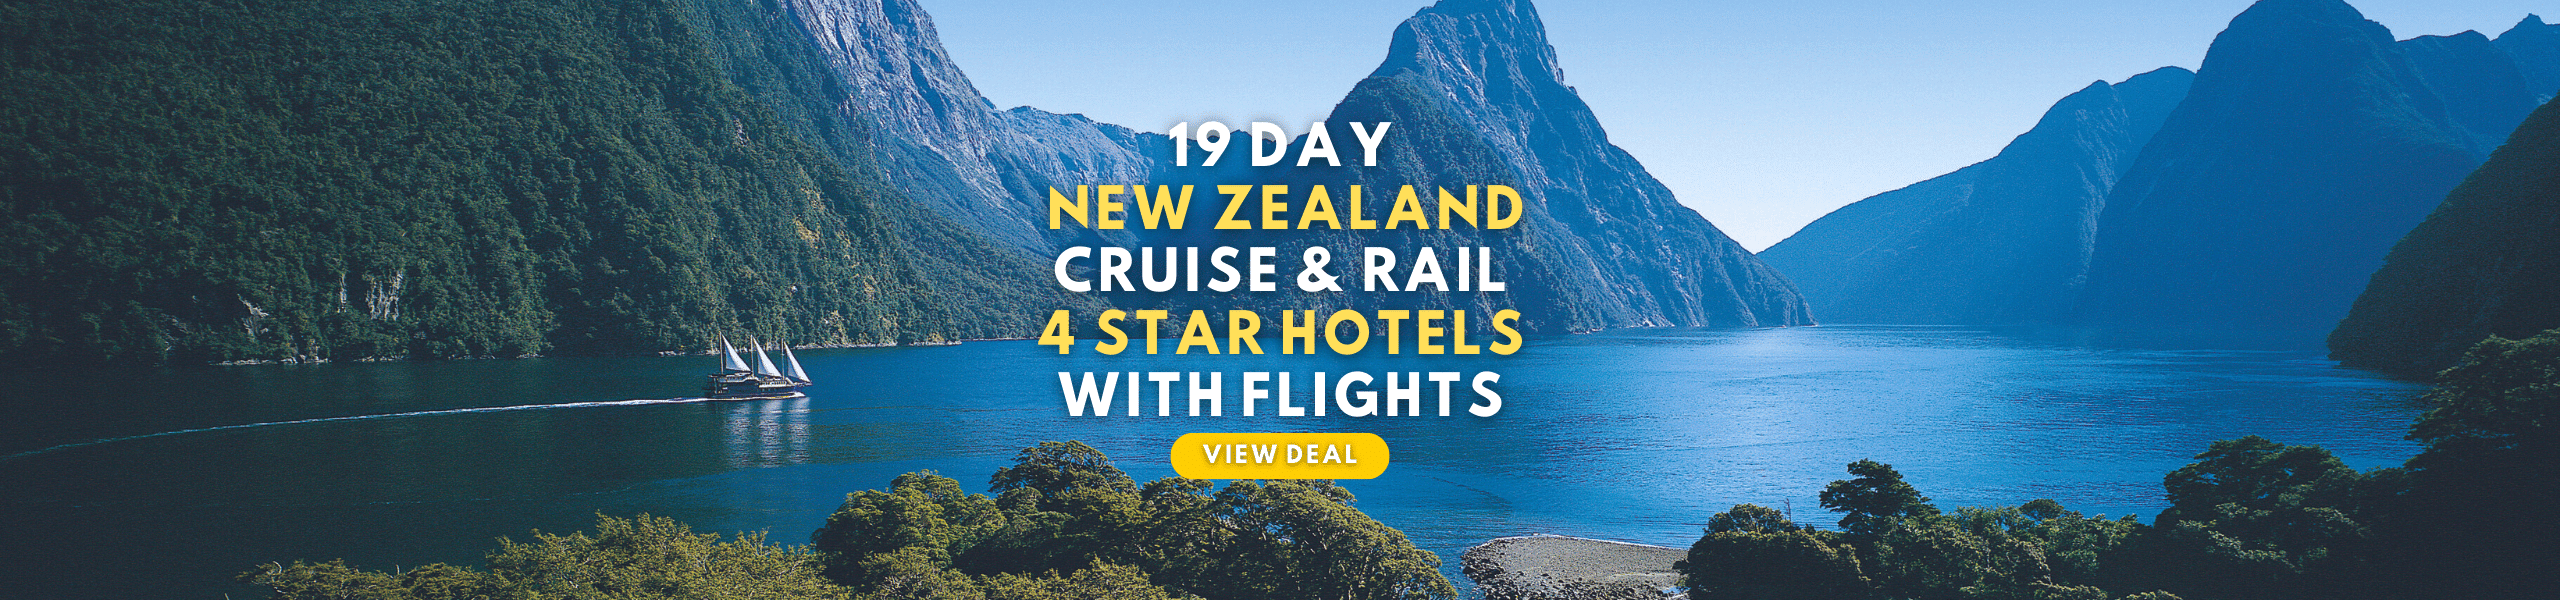 Package Tours To New Zealand From Australia 